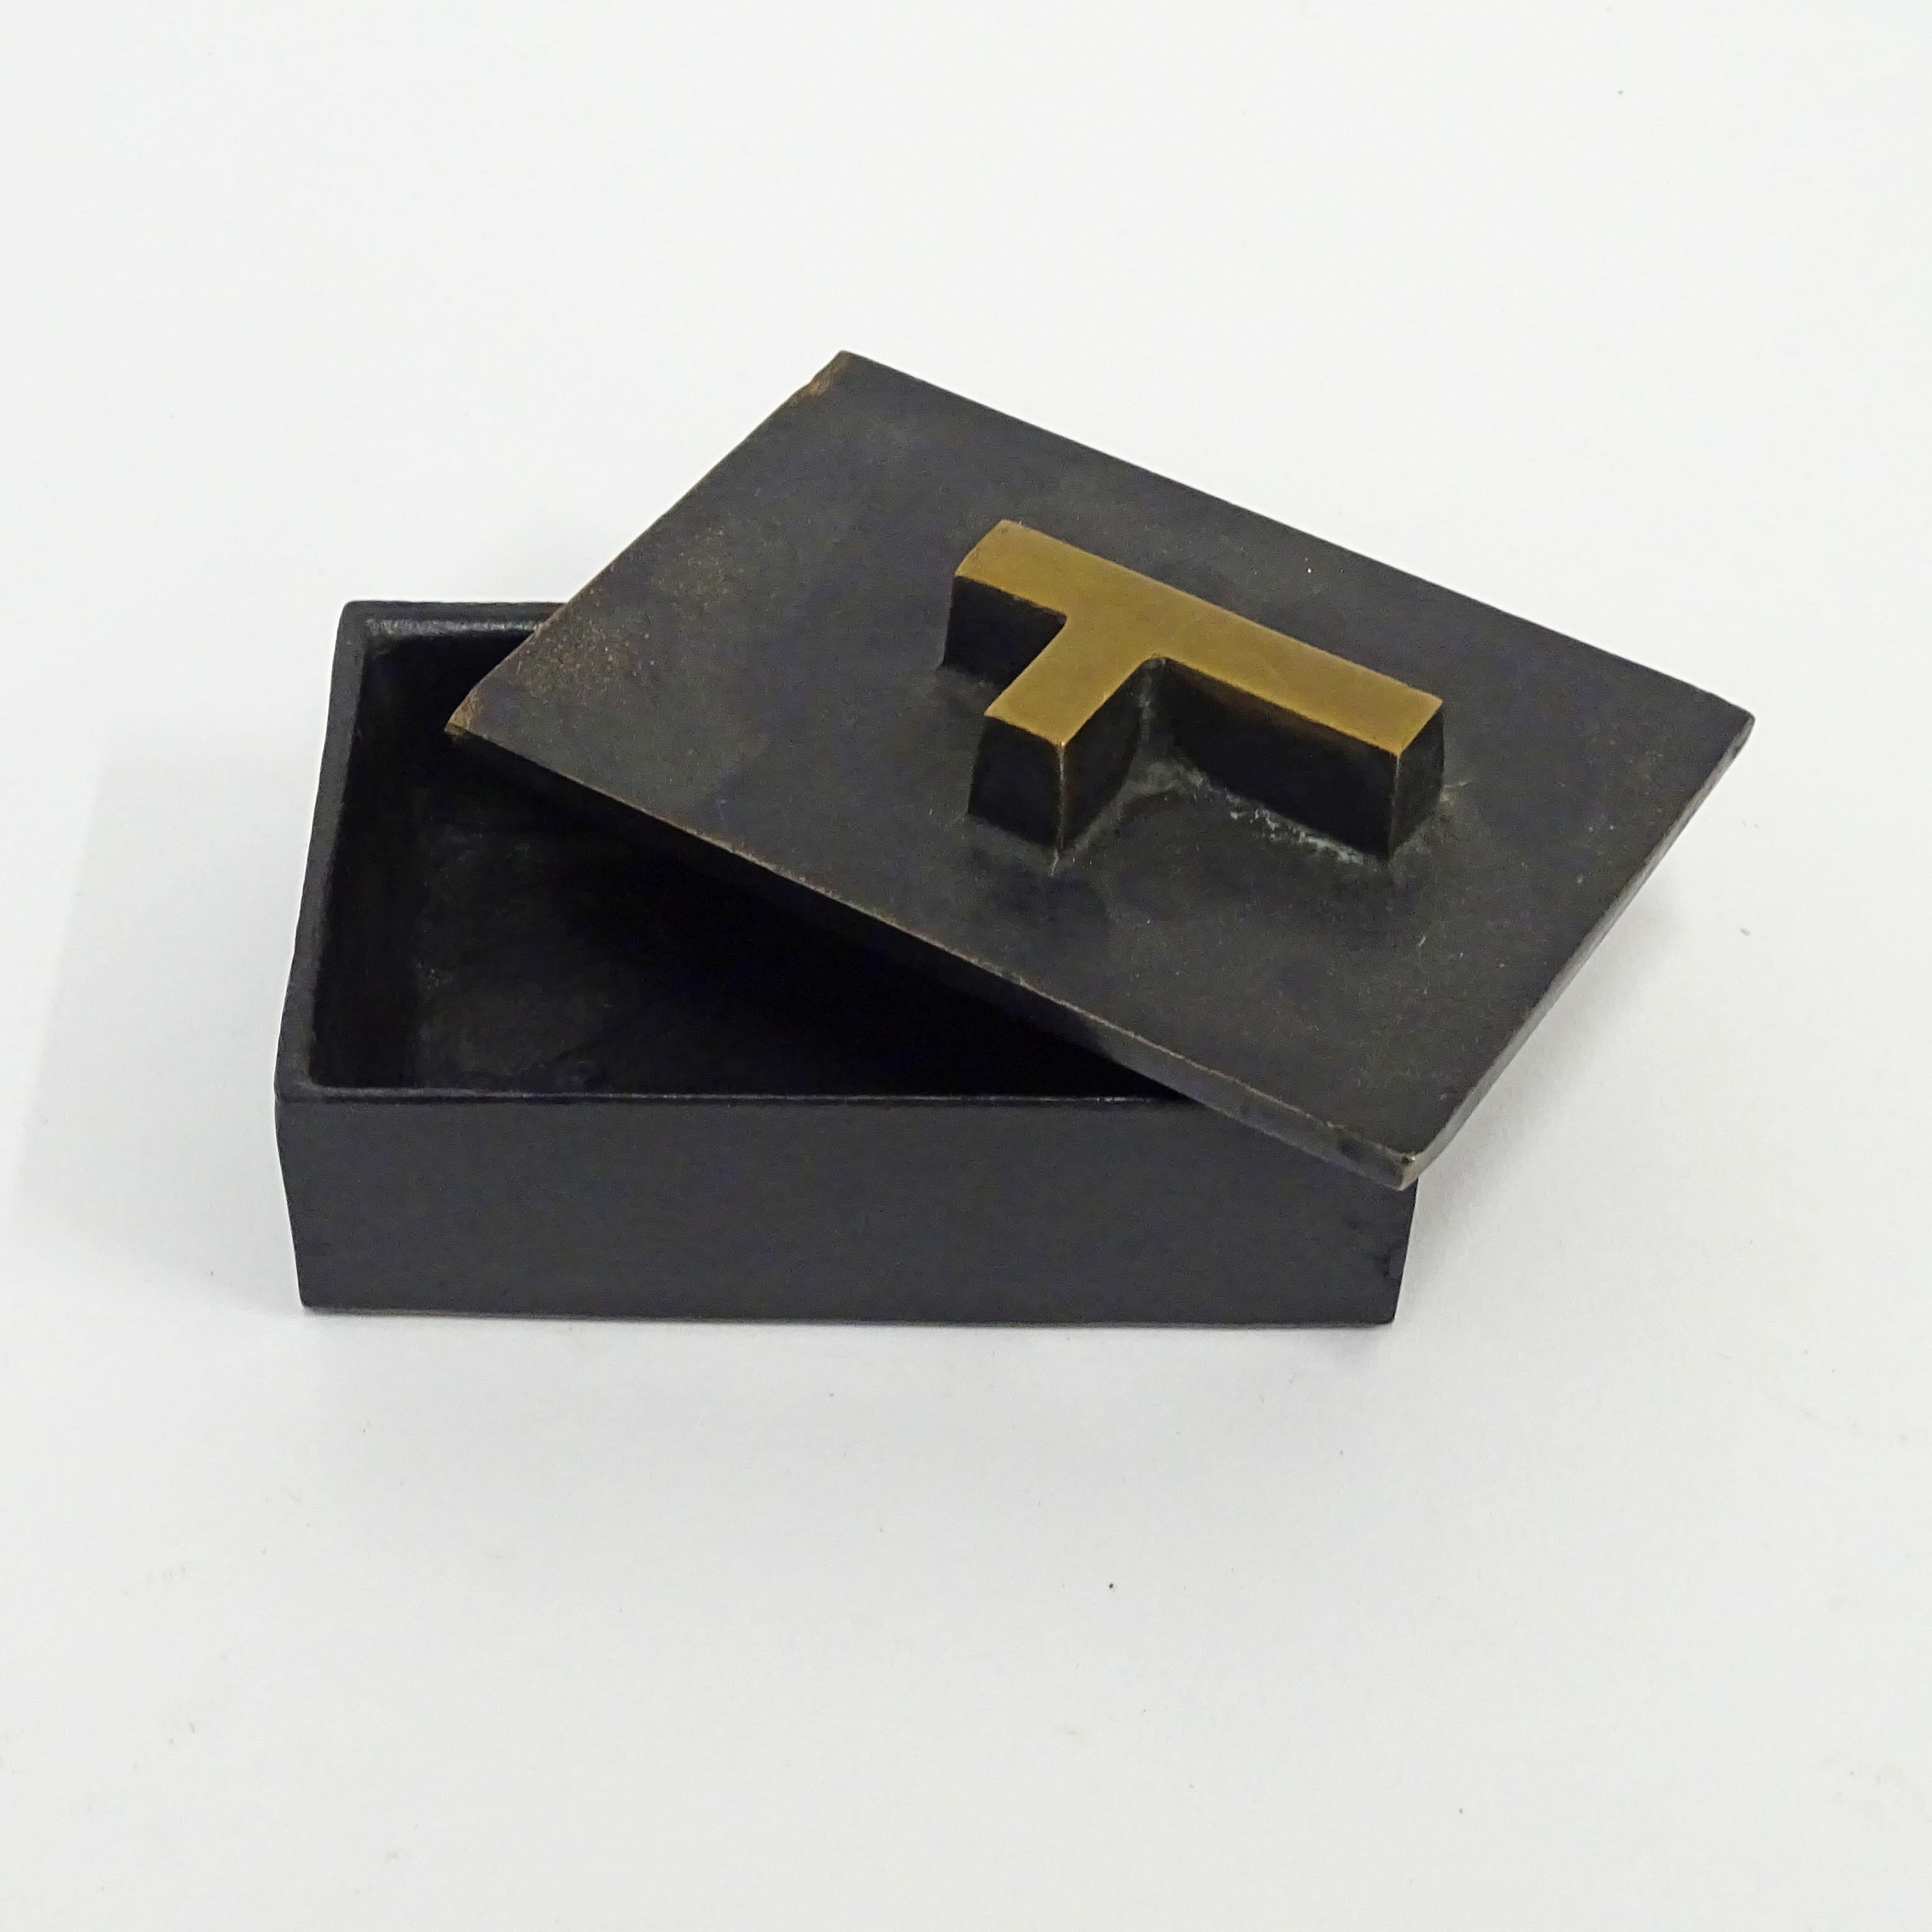 Two Garouste and Bonetti Bronze Boxes for the Collection of Herbert Blome 2001 In Excellent Condition For Sale In Milan, IT